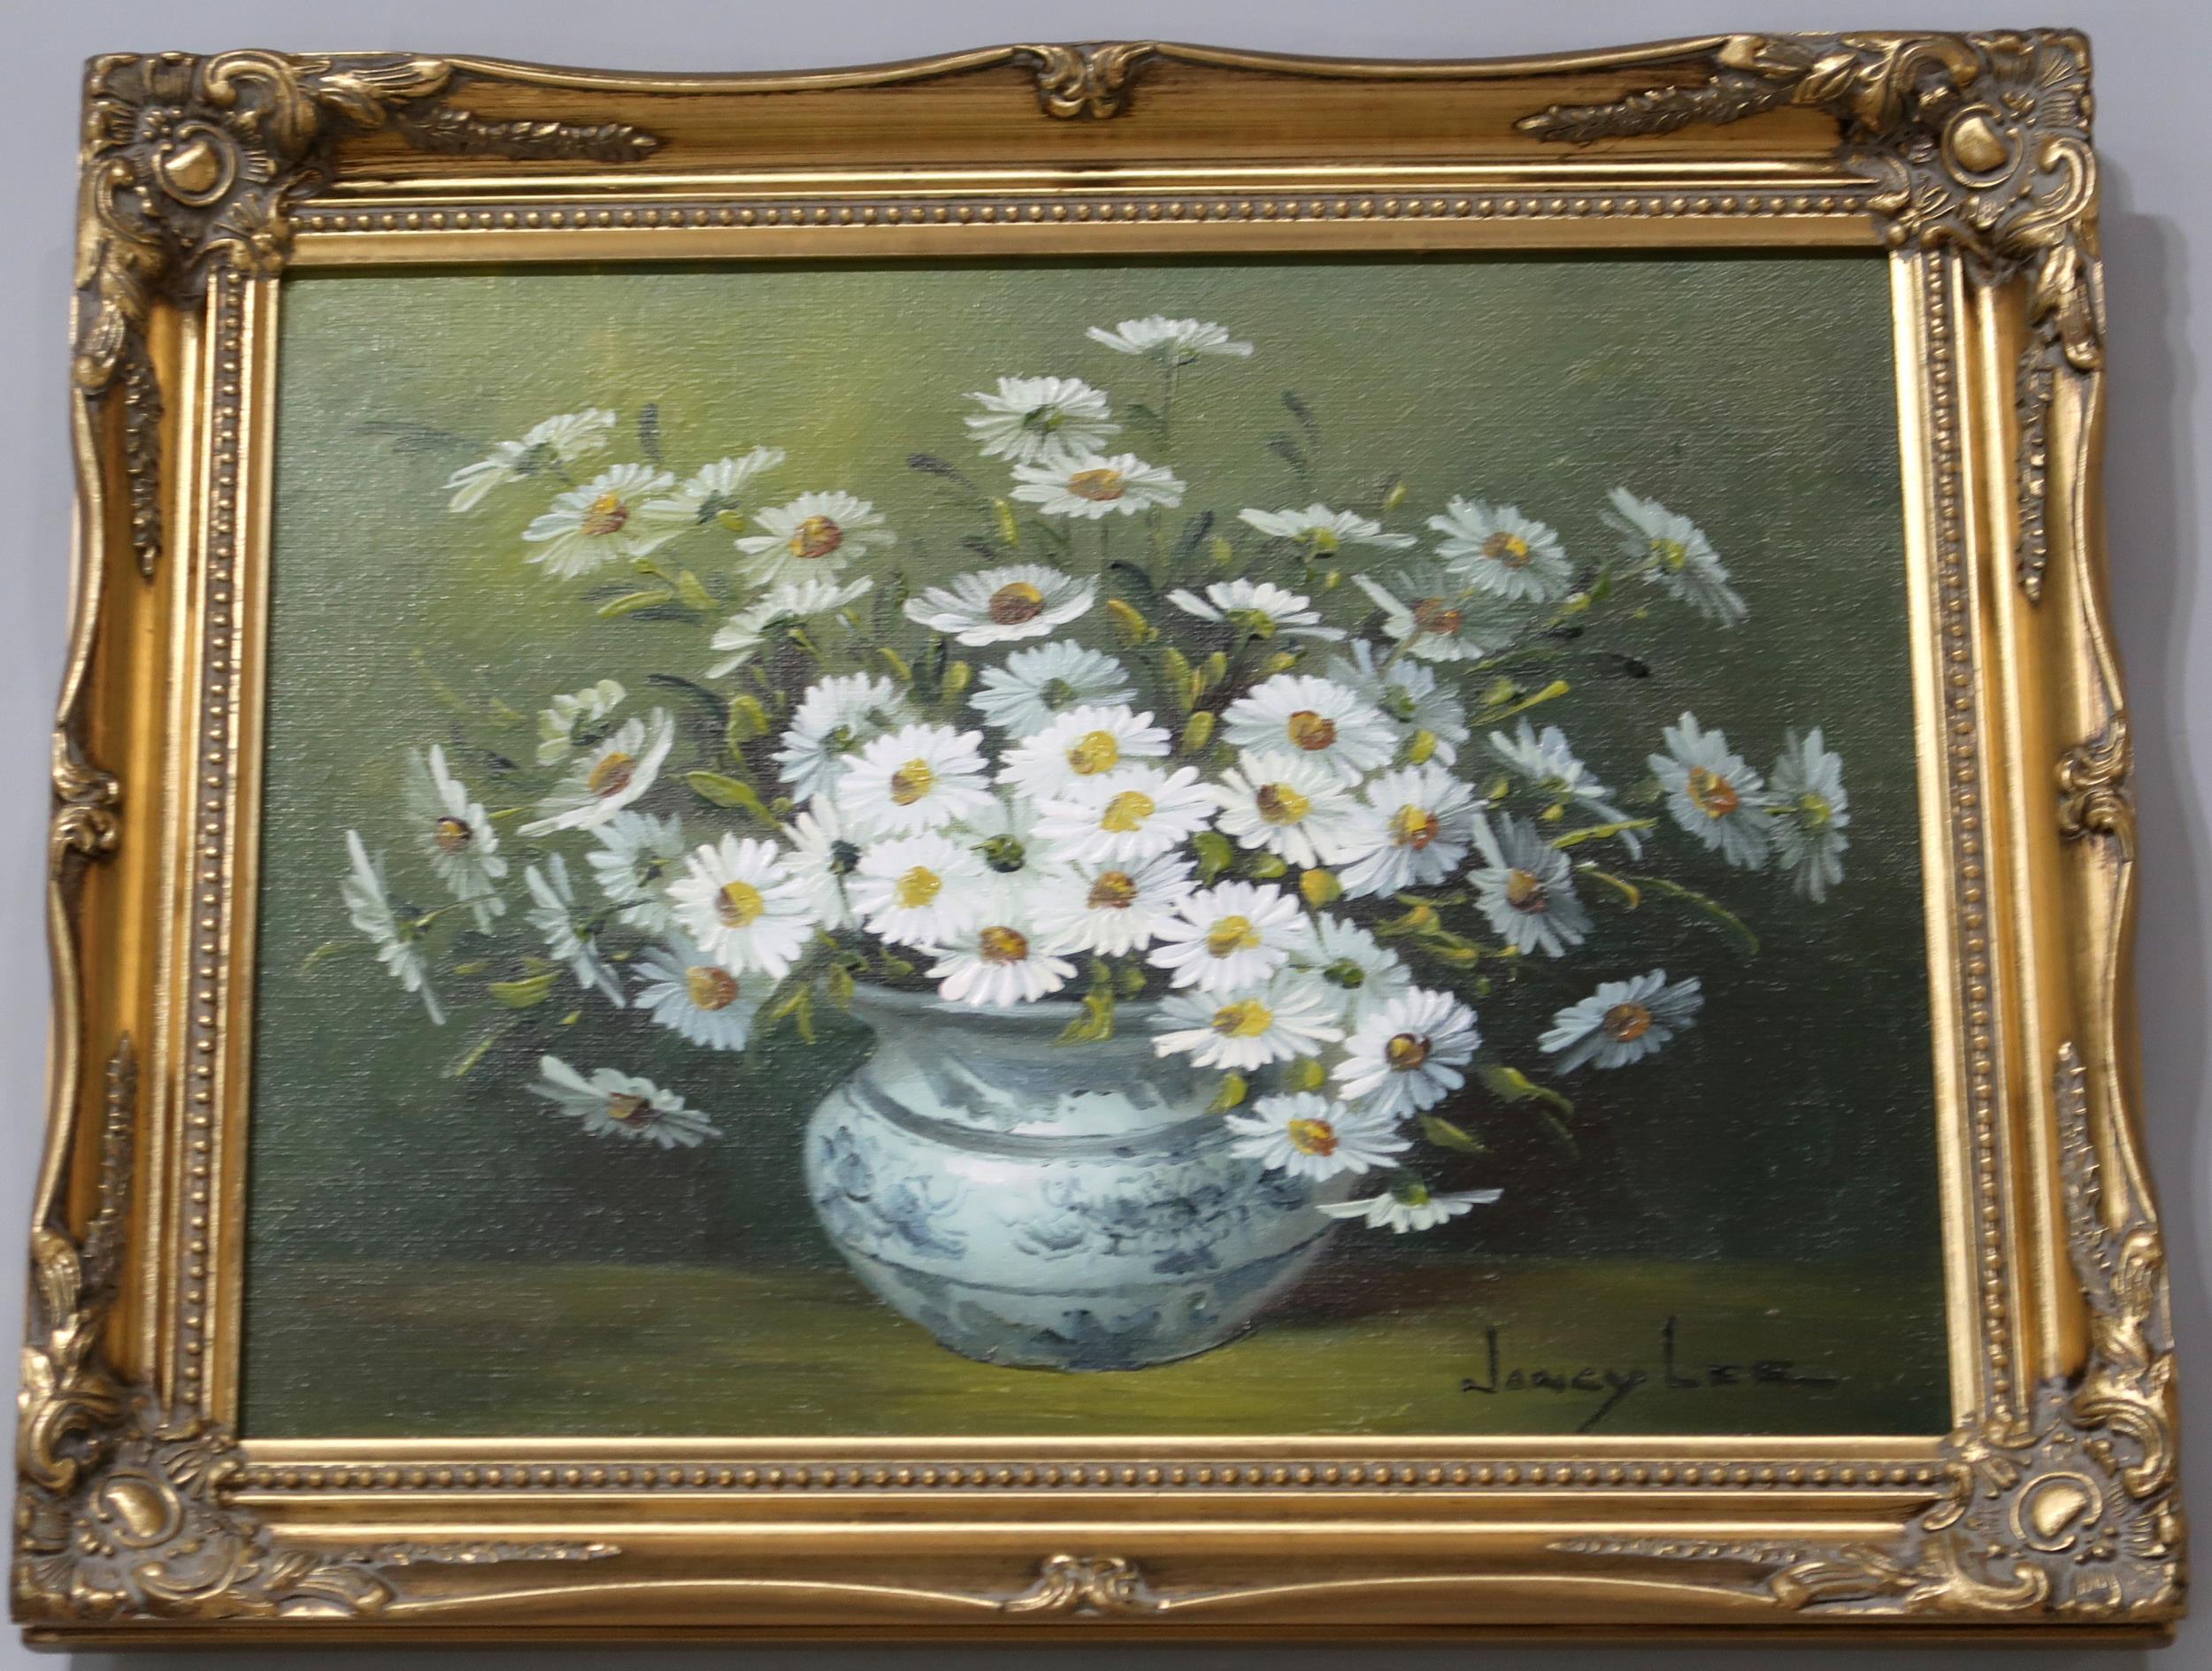 NANCY LEE (AMERICAN 20th CENTURY)  DAISIES  Oil on canvas, signed lower right, 29 x 39cm   Condition - Image 2 of 3